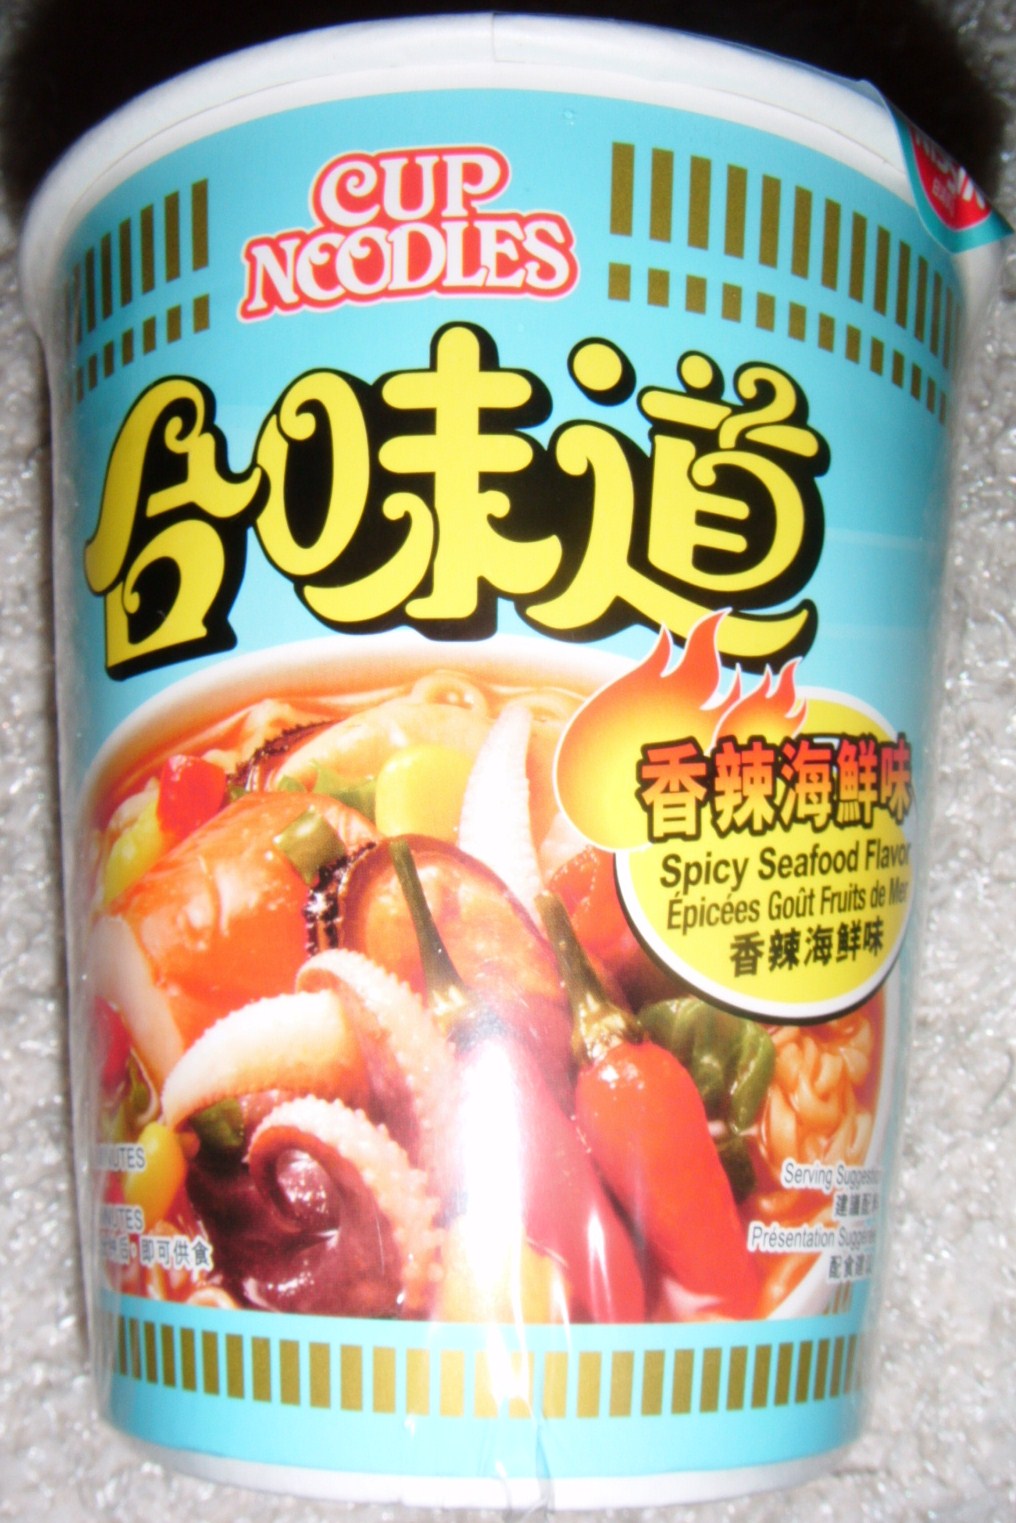 FOODSTUFF FINDS: Cup Noodles - Spicy Seafood Flavour [By Spectre